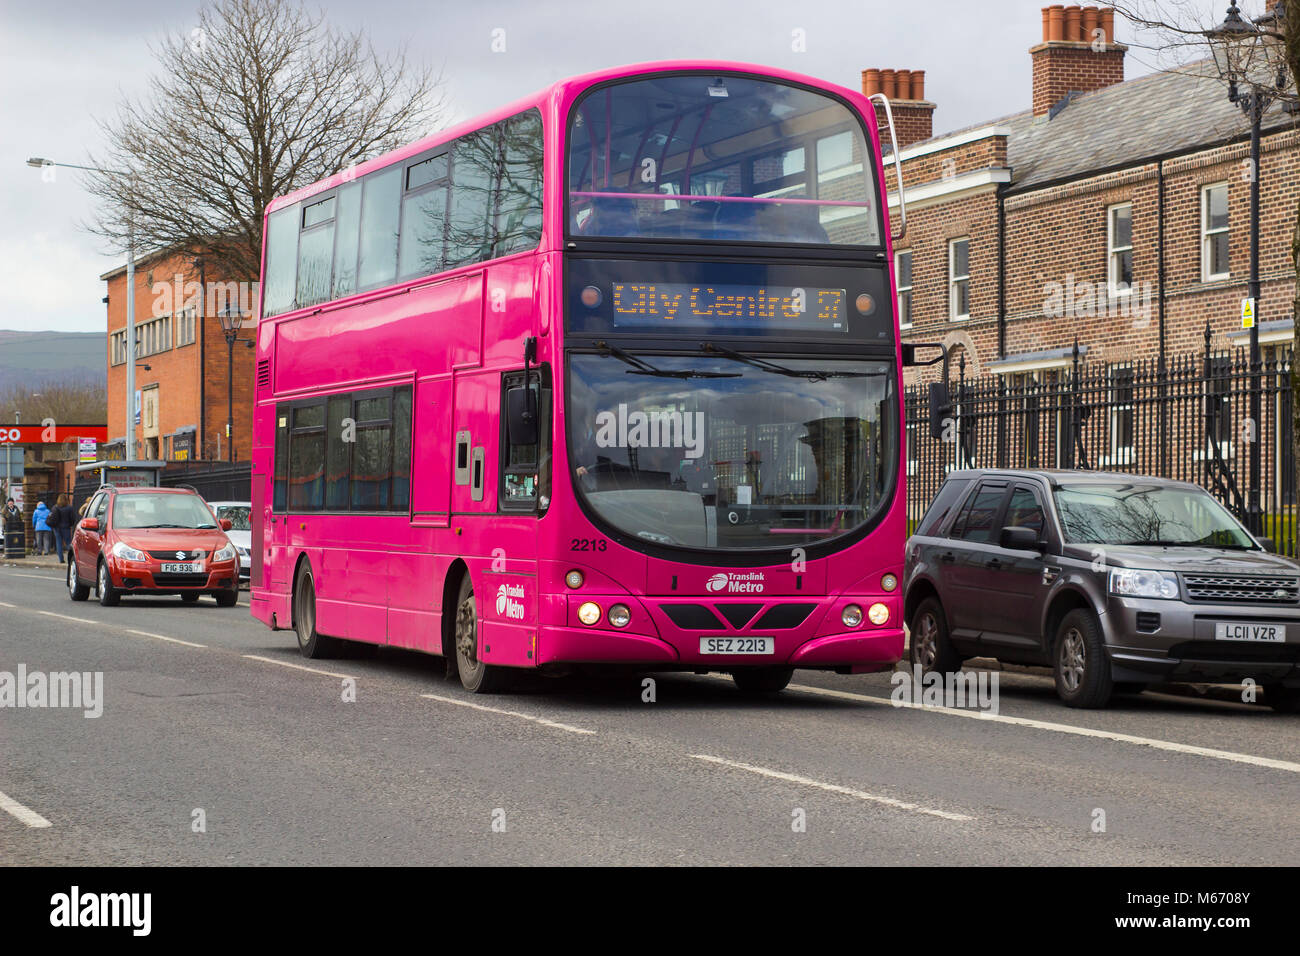 A bright pink double deck public transport bus on the Crumlin Road in belfast Northern Ireland Stock Photo